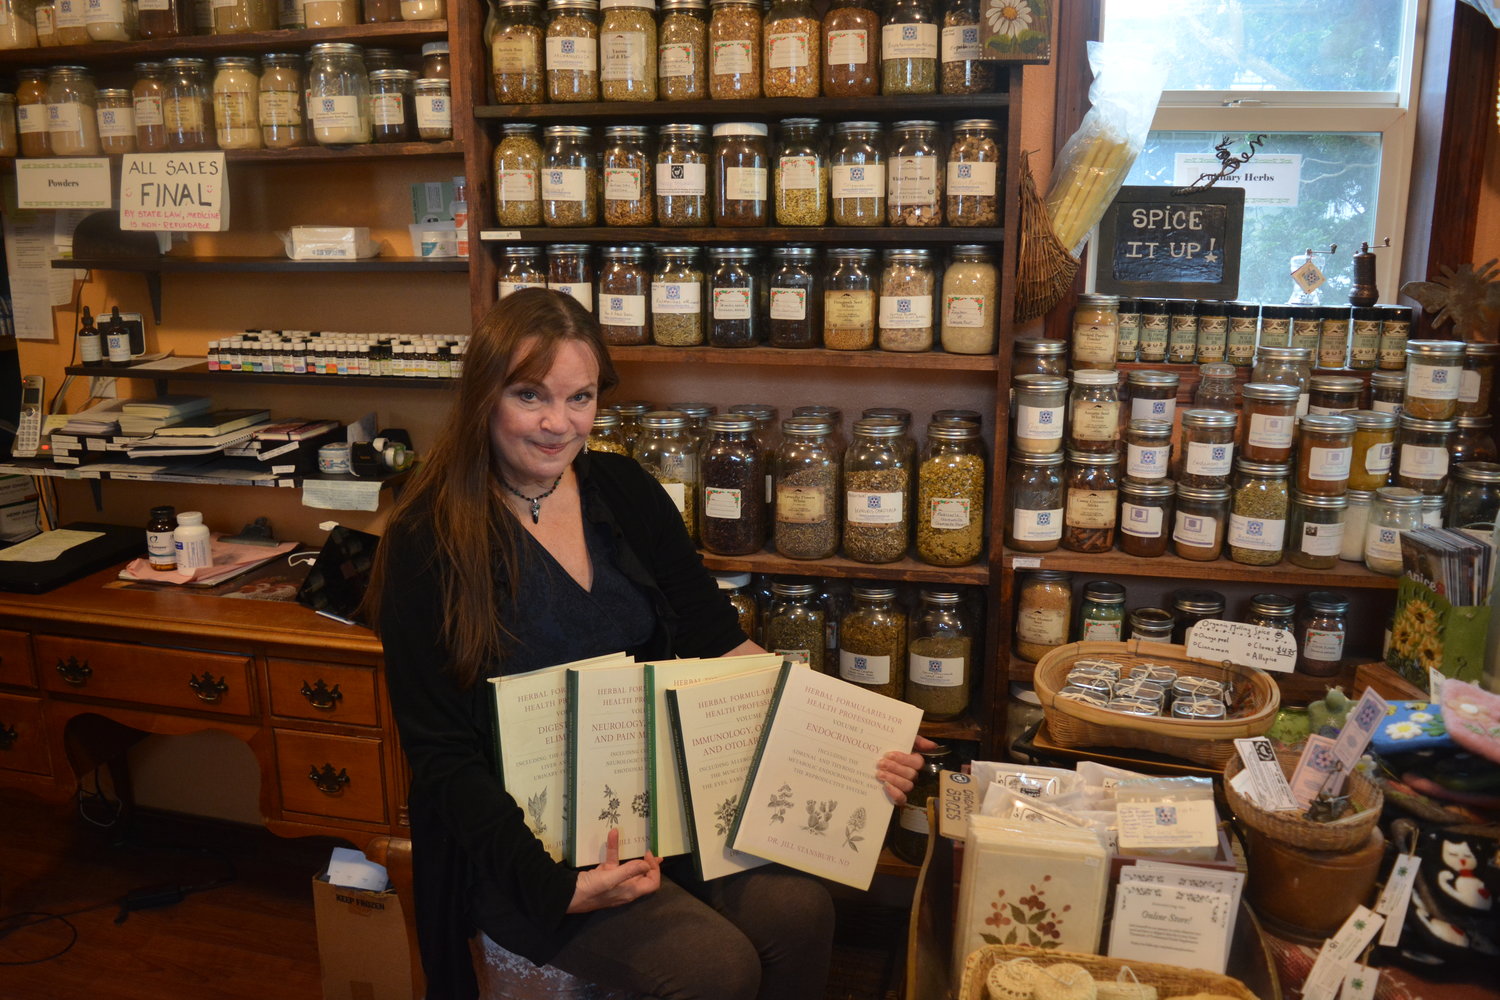 Dr. Jillian Stansbury sits in her apothecary on March 17 at Battle Ground Healing Arts as she holds her Herbal Formularies book series which won the James A. Duke Excellence in Botanical Literature Award.